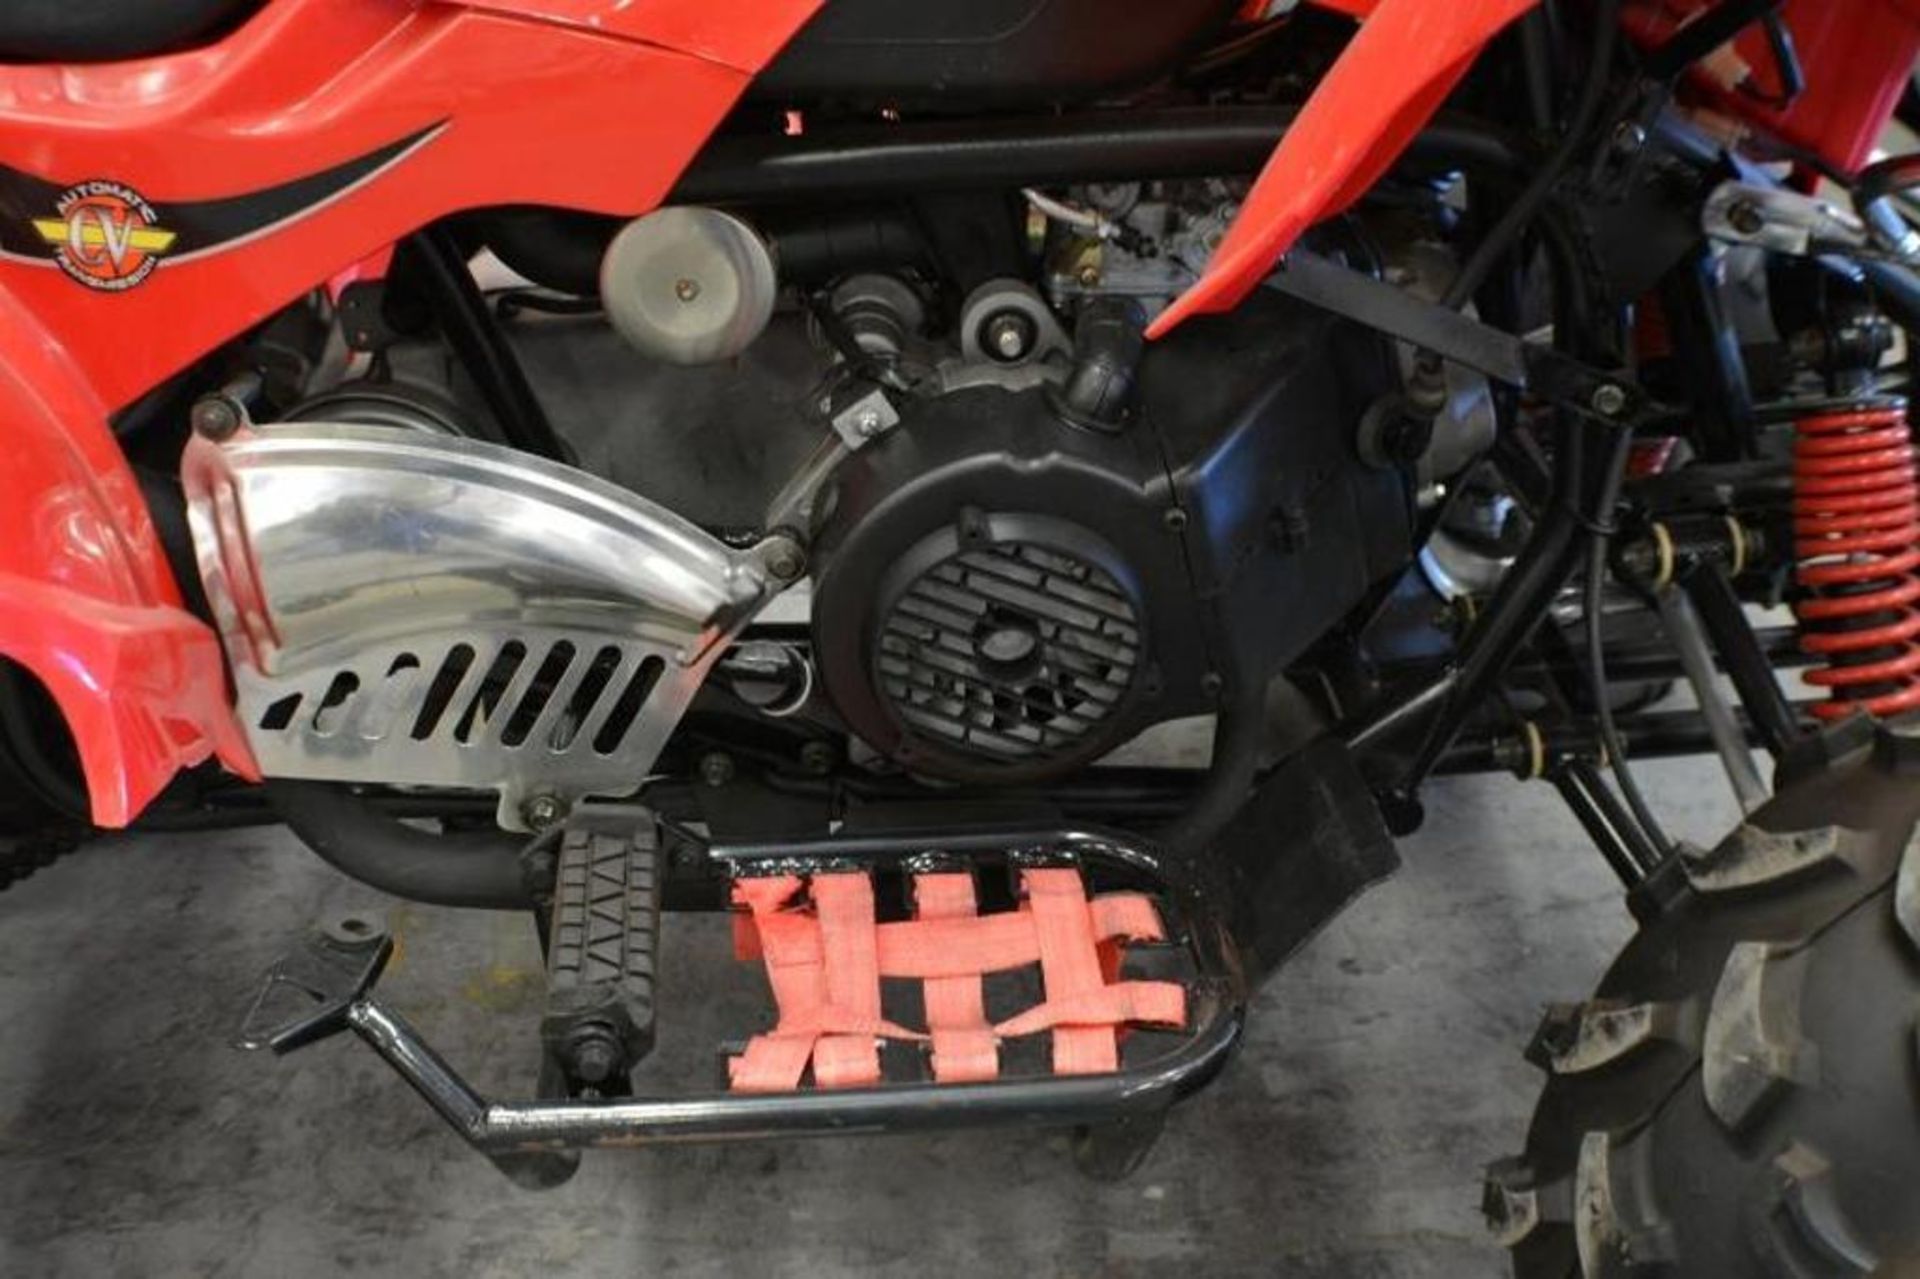 ATV 150cc 4 Stroke. Red Color. For Repair. This unit are for EXPORT ONLY. Buyers acknowledges is for - Image 6 of 11